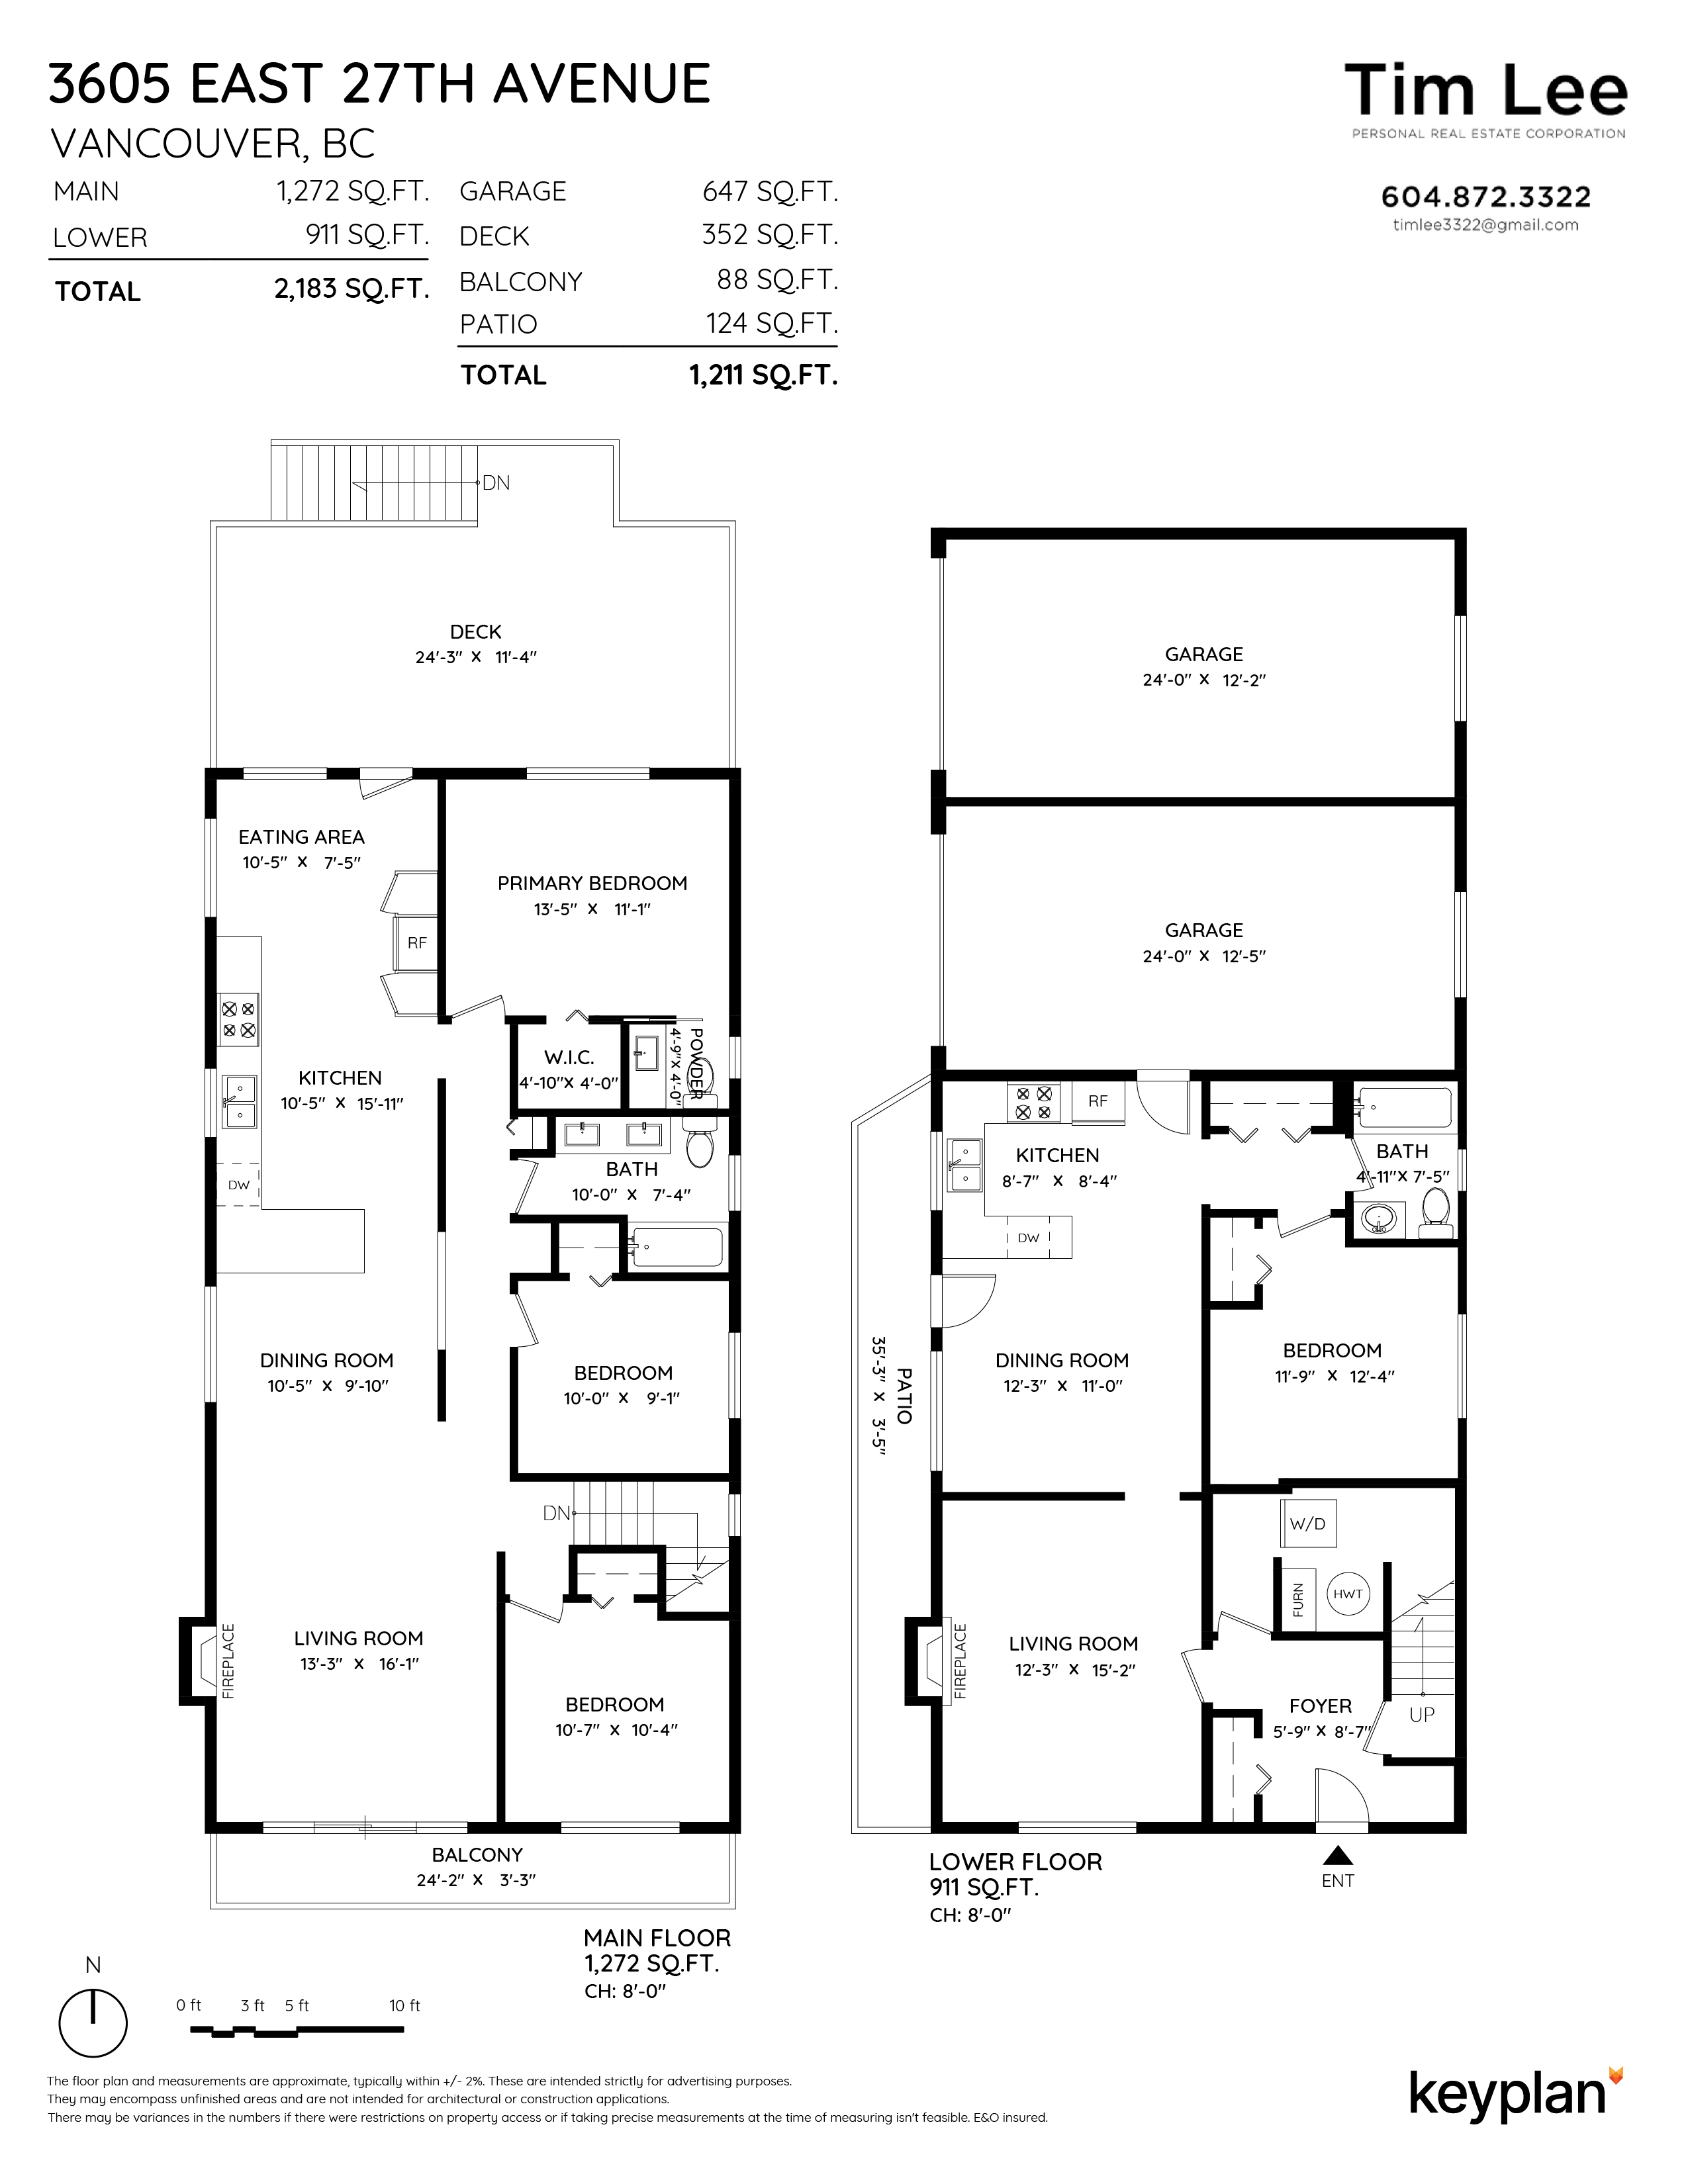 Tim Lee - 3605 East 27th Avenue, Vancouver, BC, Canada | Floor Plan 1